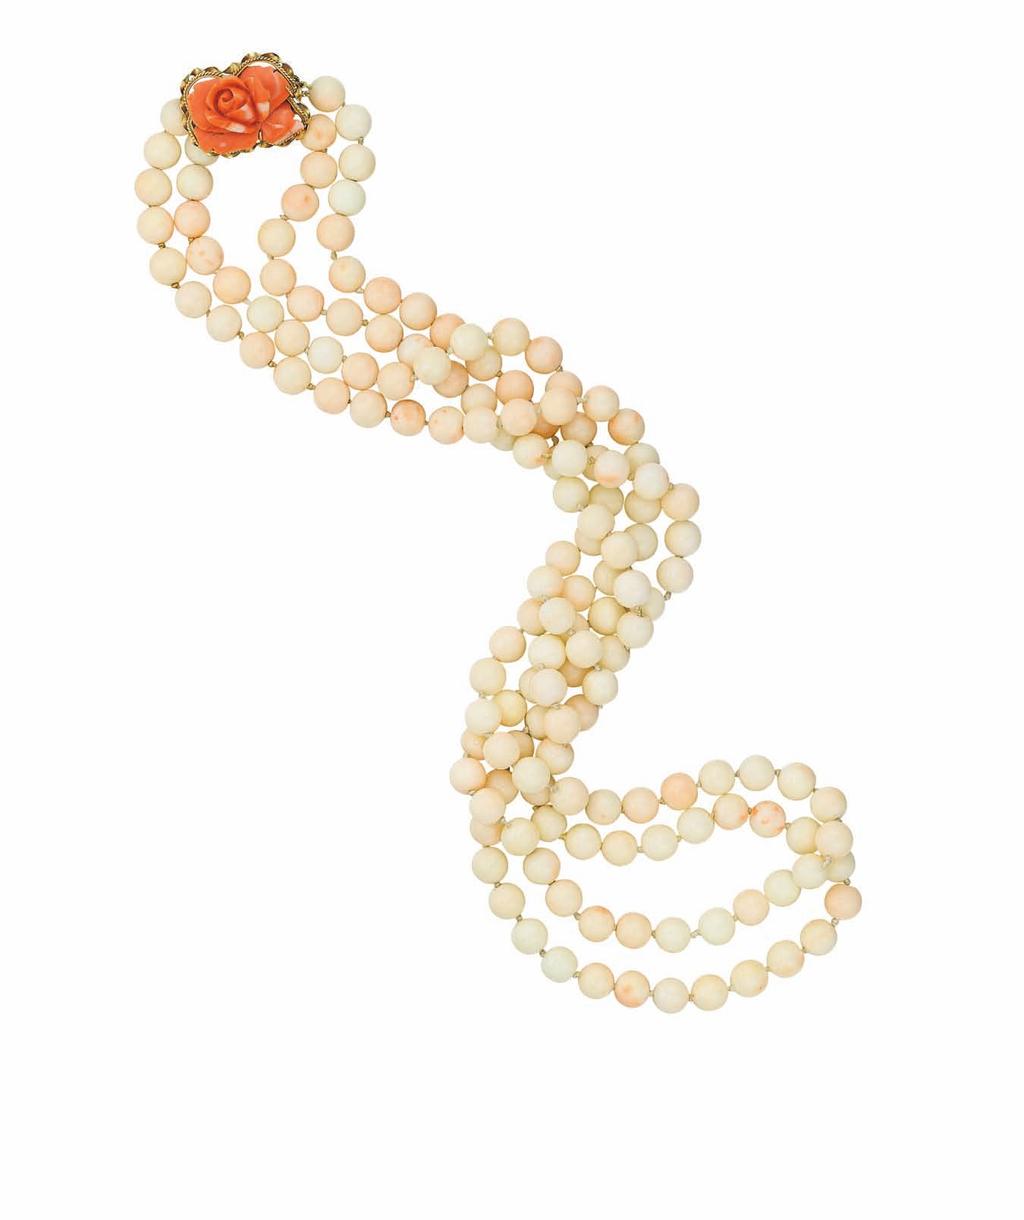 12 14 13 15 PROPERTY OF A LADY 12 A Set of Coral Jewelry Comprising a necklace, of two strands of coral beads, measuring from approximately 8.74 to 8.